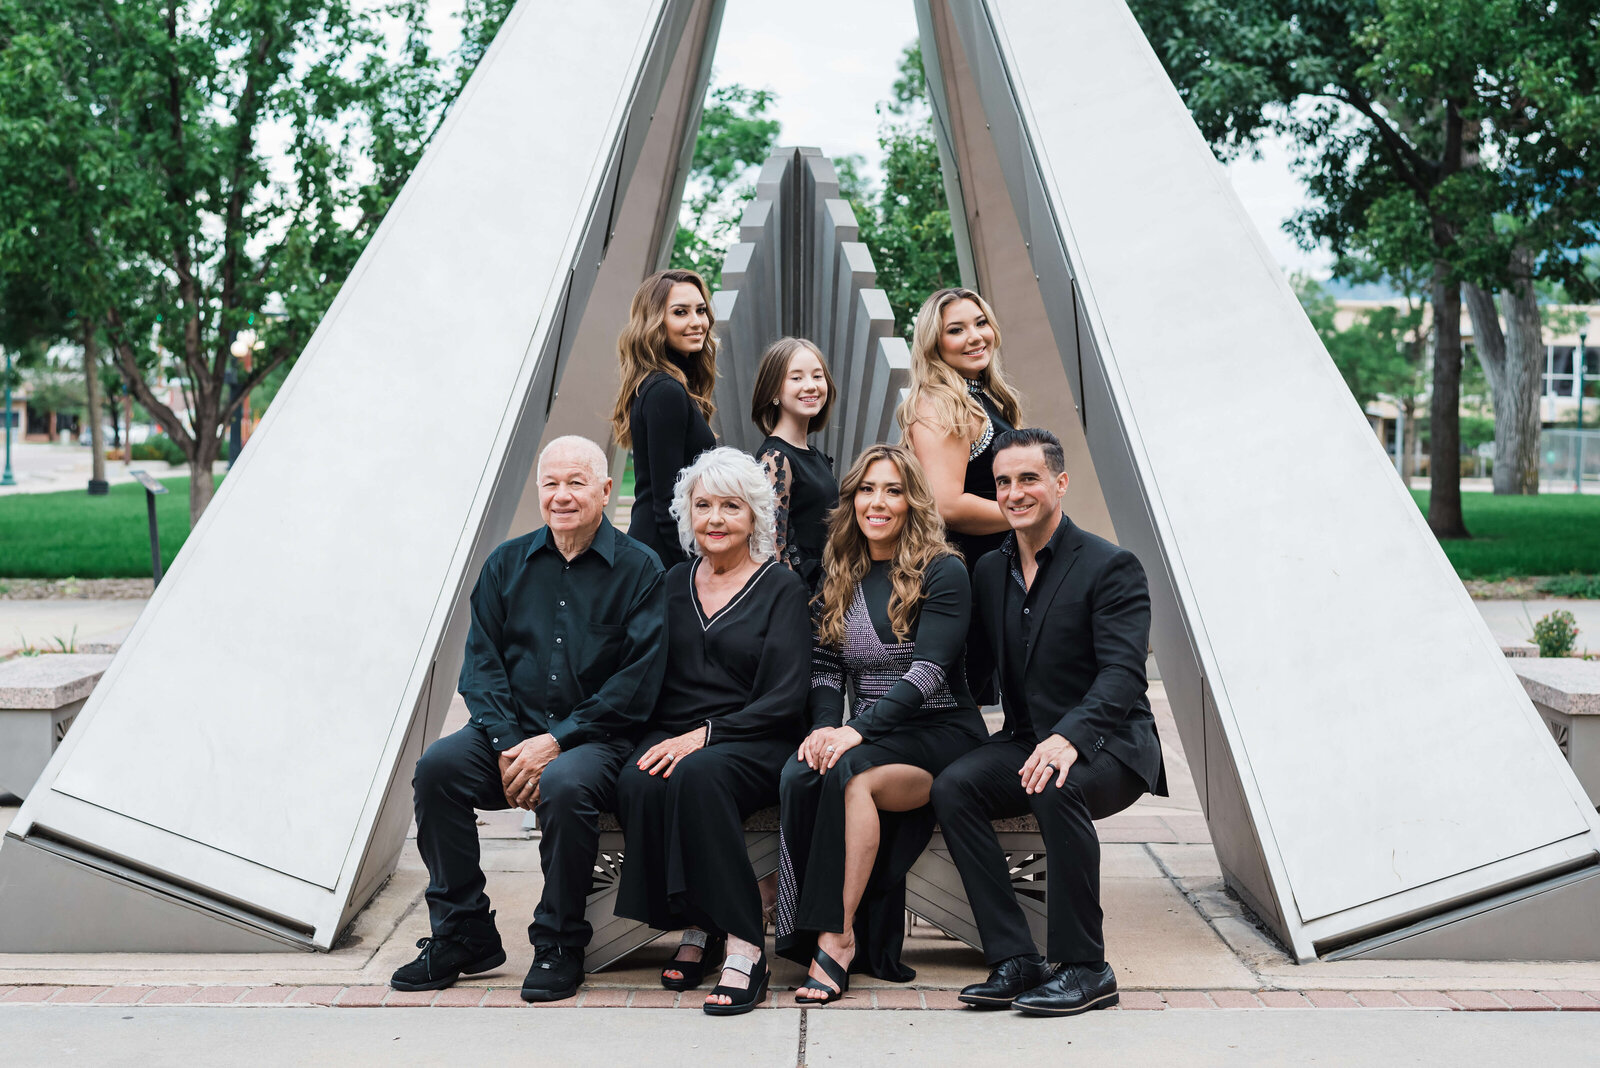 Northern Virginia family photographer takes a formal photo of an adult family, including grandparents, while they sit in front of an art statue